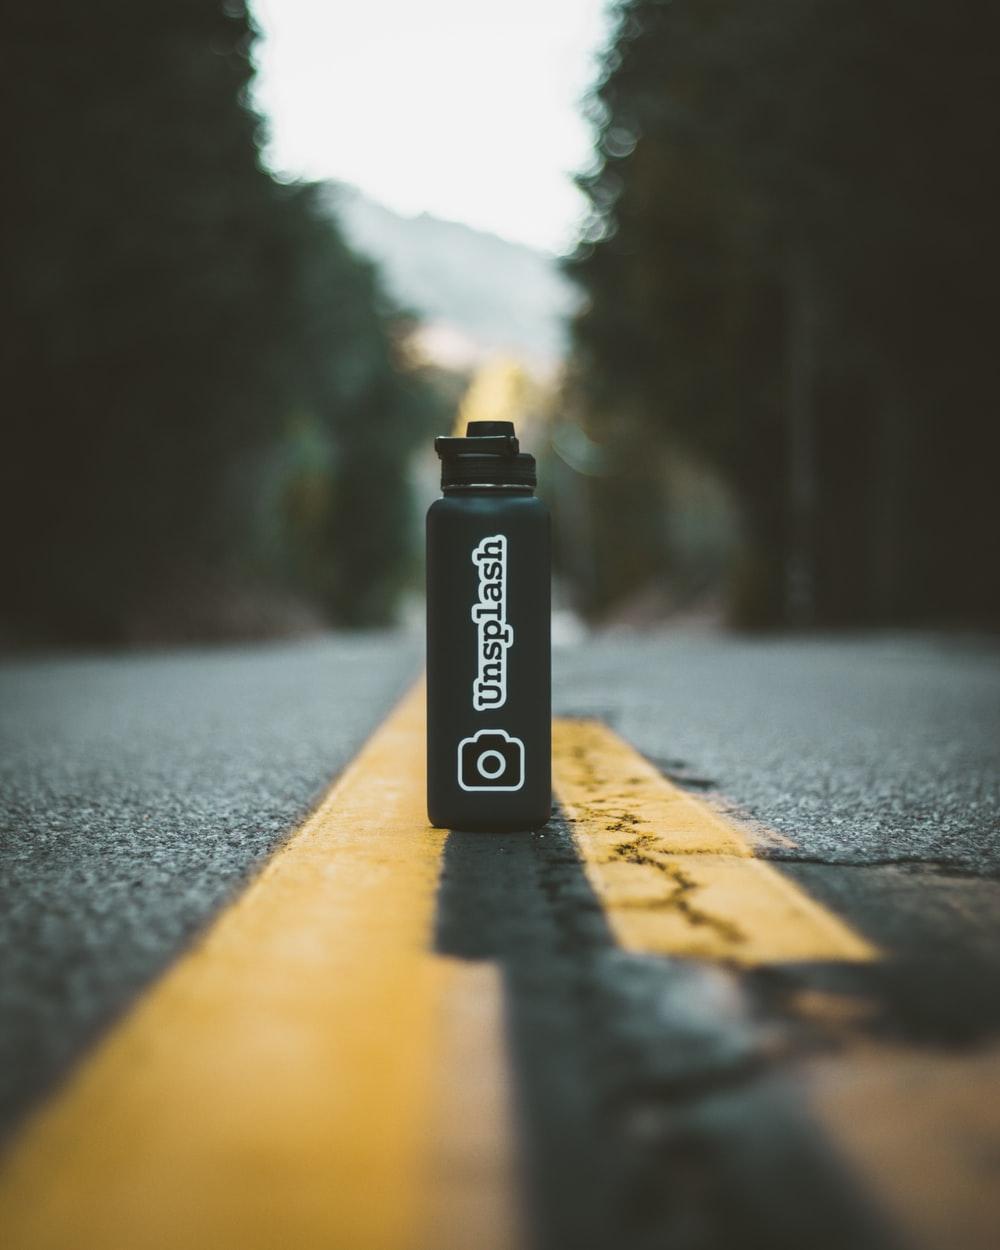 Hydroflask Picture. Download Free Image